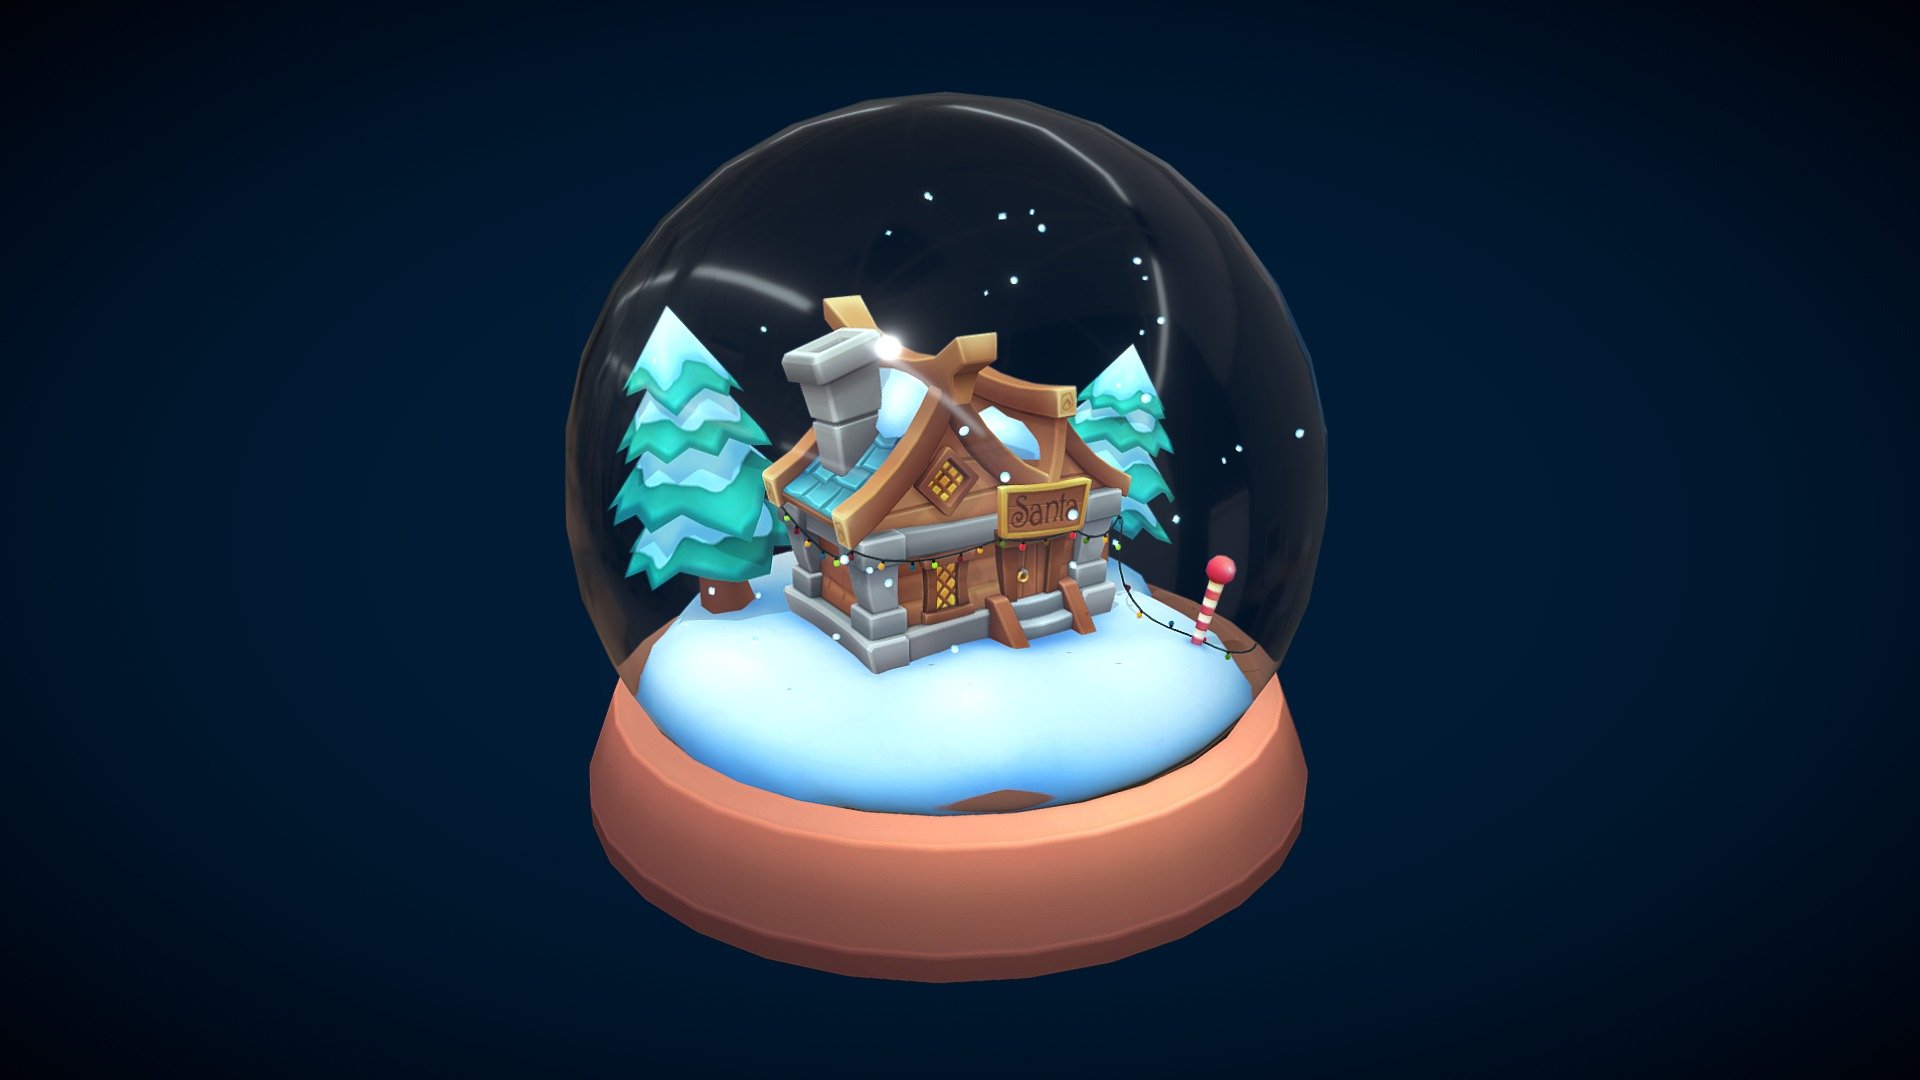 Cosy Fantasy style Santa Claus house at North pole in a crystal glass ball.

Mobile ready.

Asset contains separate meshes that, if needed, can be manually removed/hidden from scene:
House 3364 triangles
Base (glassball base, snow, trees, northpole) 1004 triangles
Glassball 672 triangles
Snowflakes 306 triangles
Wire with animated bulbs 3104

Animation: 30fps (420 frames loop, snowflakes animated with joints, bulbs with visibility on/off) 

Textures: 2 handpainted textures (house and base) 2048x2048 + 1 snowflake texture 512x512

Feel free to contact us if You need to complete tasks on 3D modeling or animation. Also visit us to find more and to request estimates on www.yeyostudio.com - Christmas Santa House Glass Ball - Animated loop - Buy Royalty Free 3D model by Yeyo Studio (@yeyostudio) 3d model